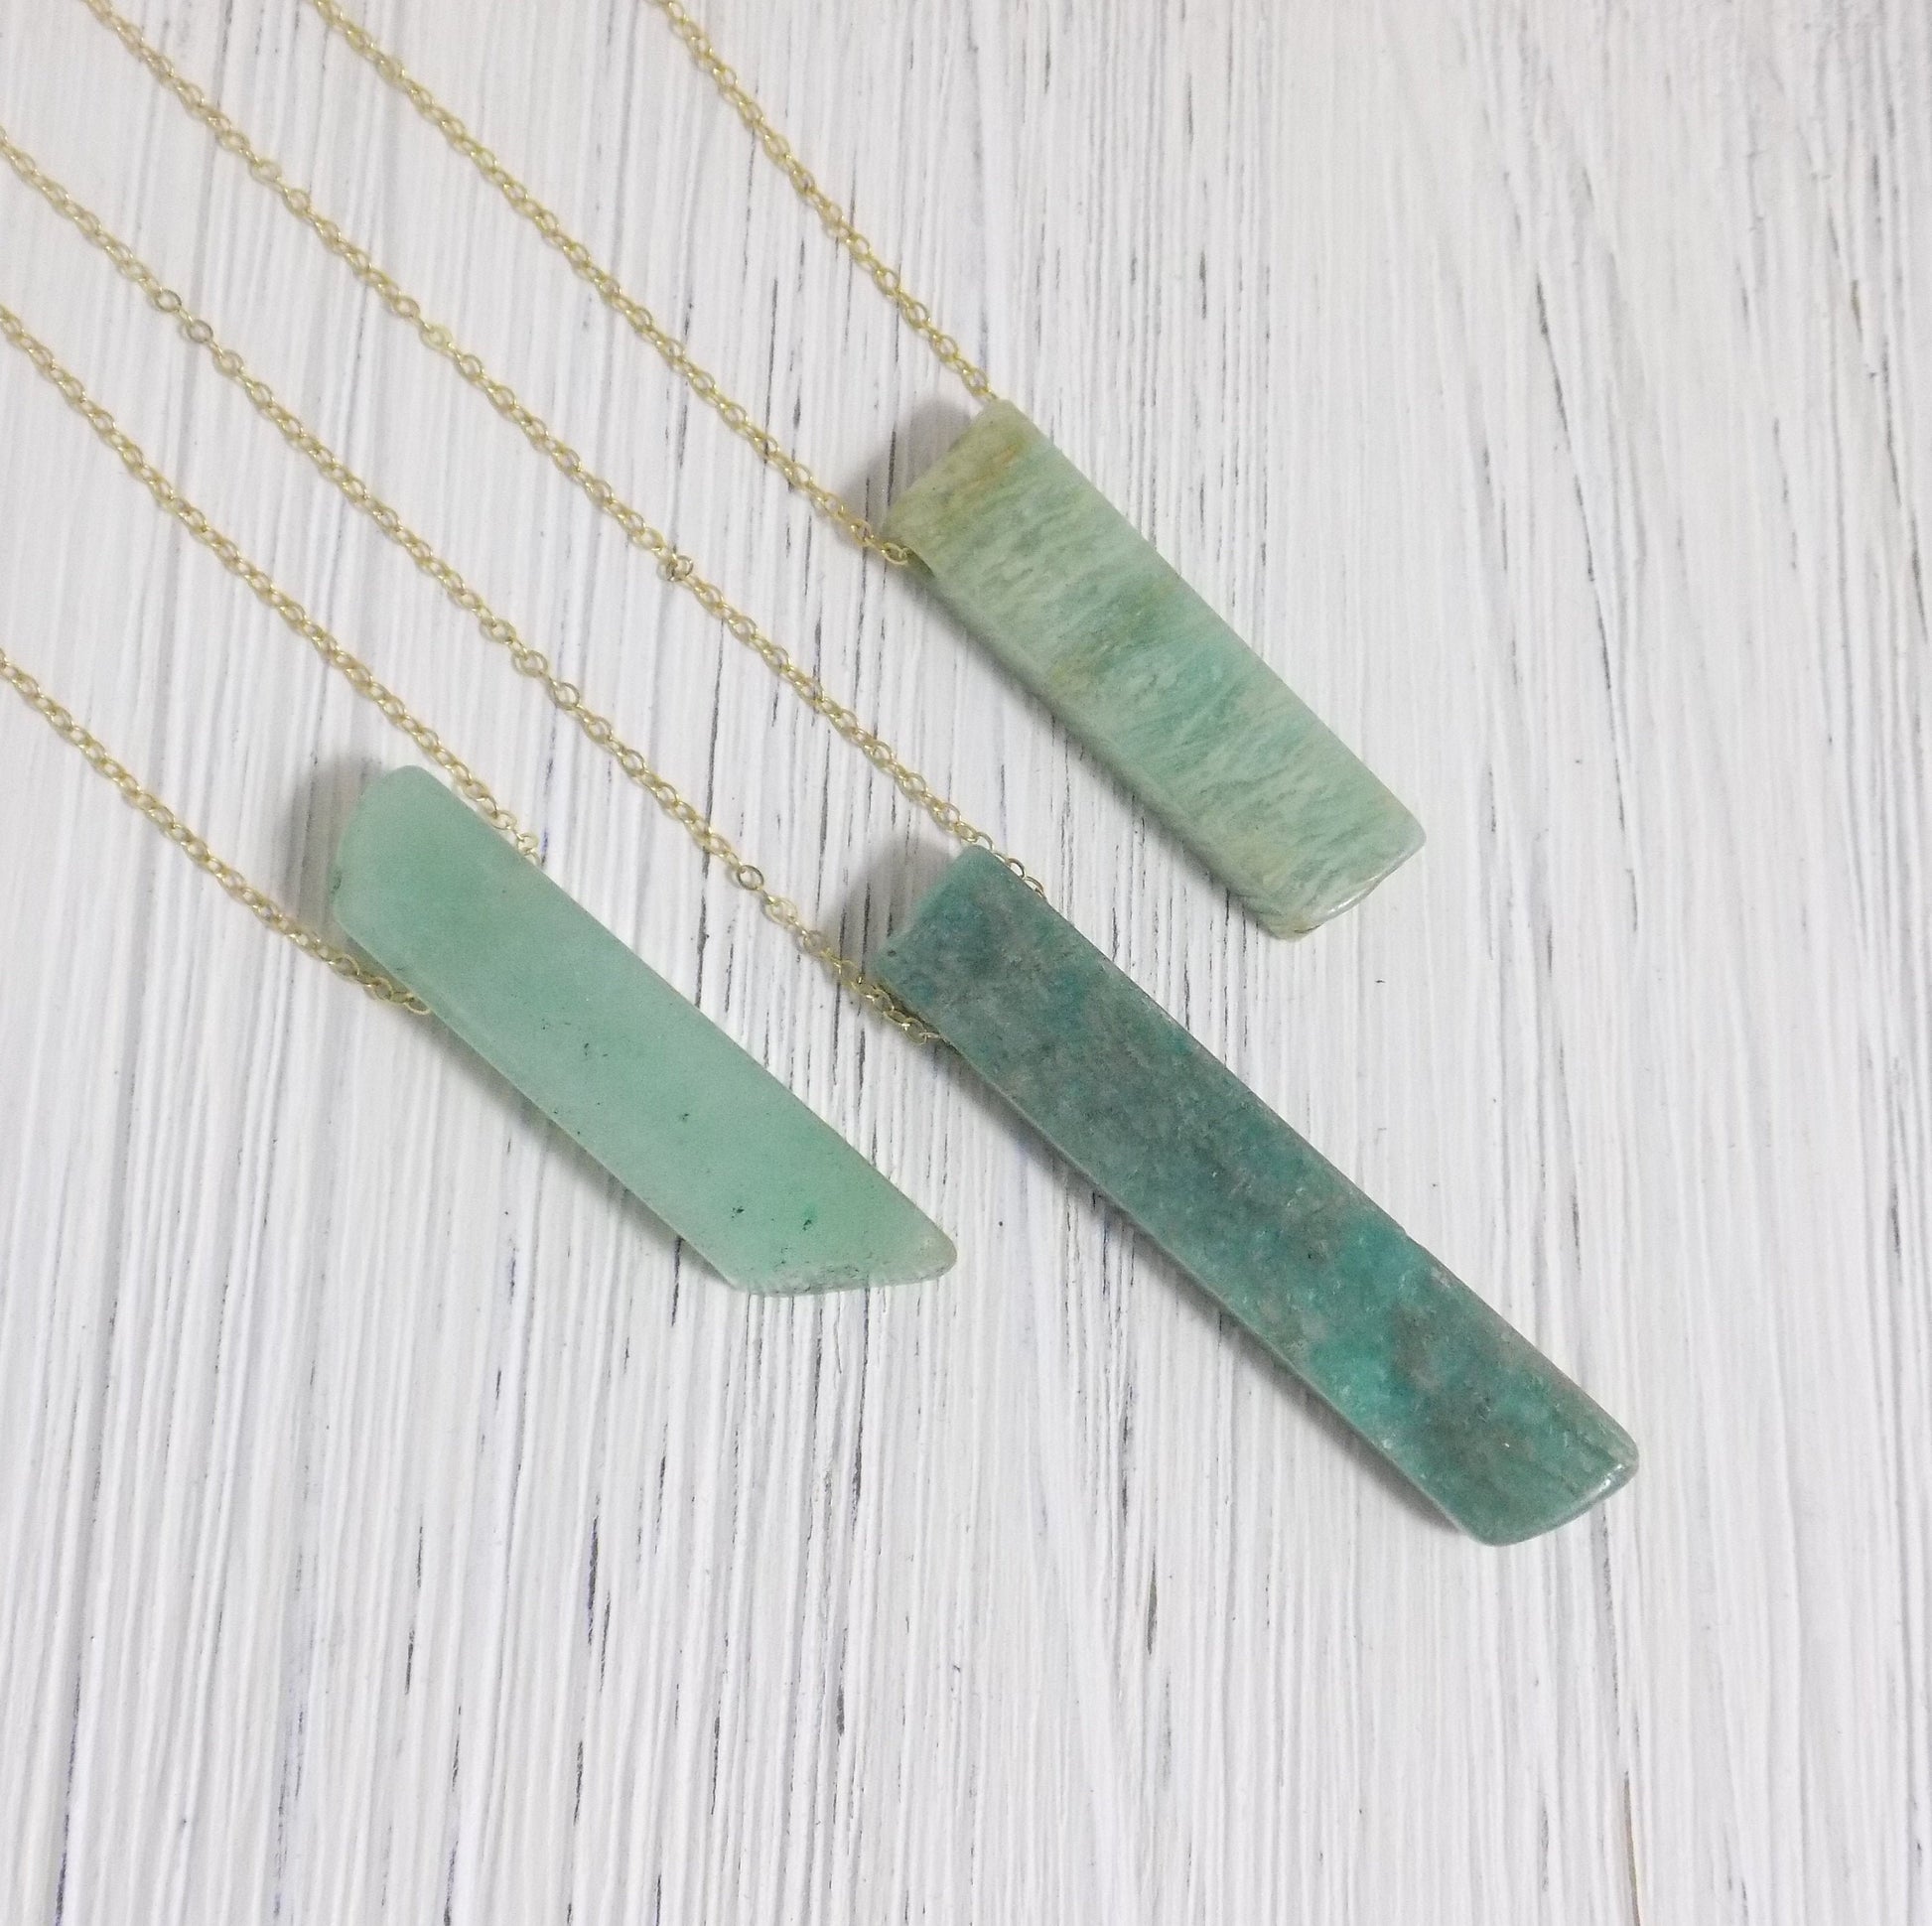 Aventurine Necklace, Green Aventurine Necklace Green Stone Necklace Gold OR Silver Layering Necklace Large Pendant Necklace Gift Women K2-01